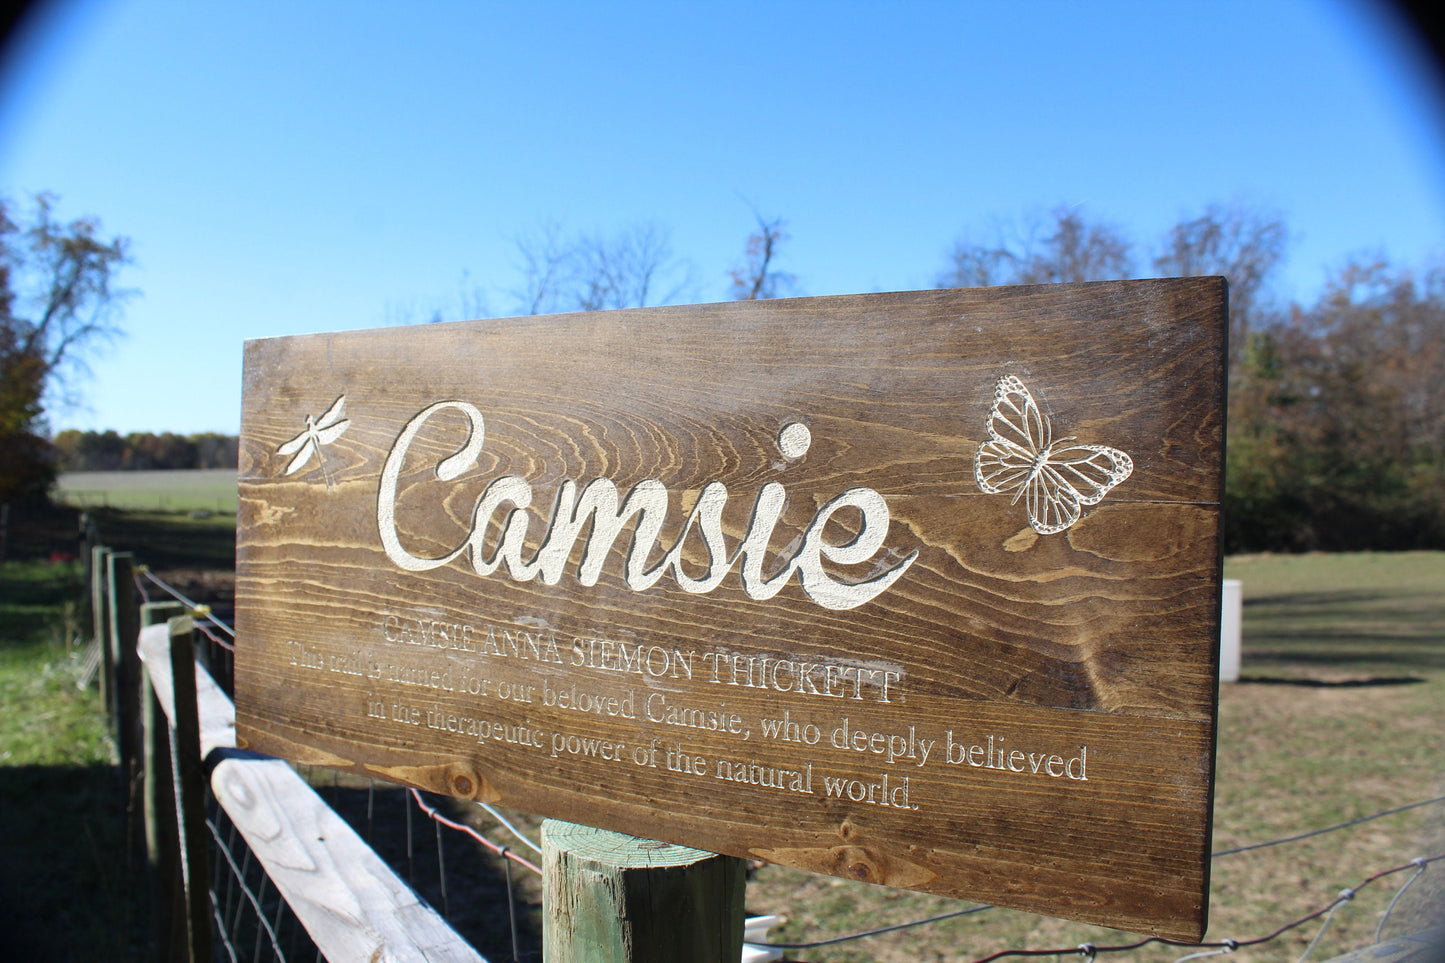 Camsie Dedication Trail Memorial Custom Wood Business Outdoor Sign Wall Decor Personalized Signs Laser Engraving Footstepsinthepast